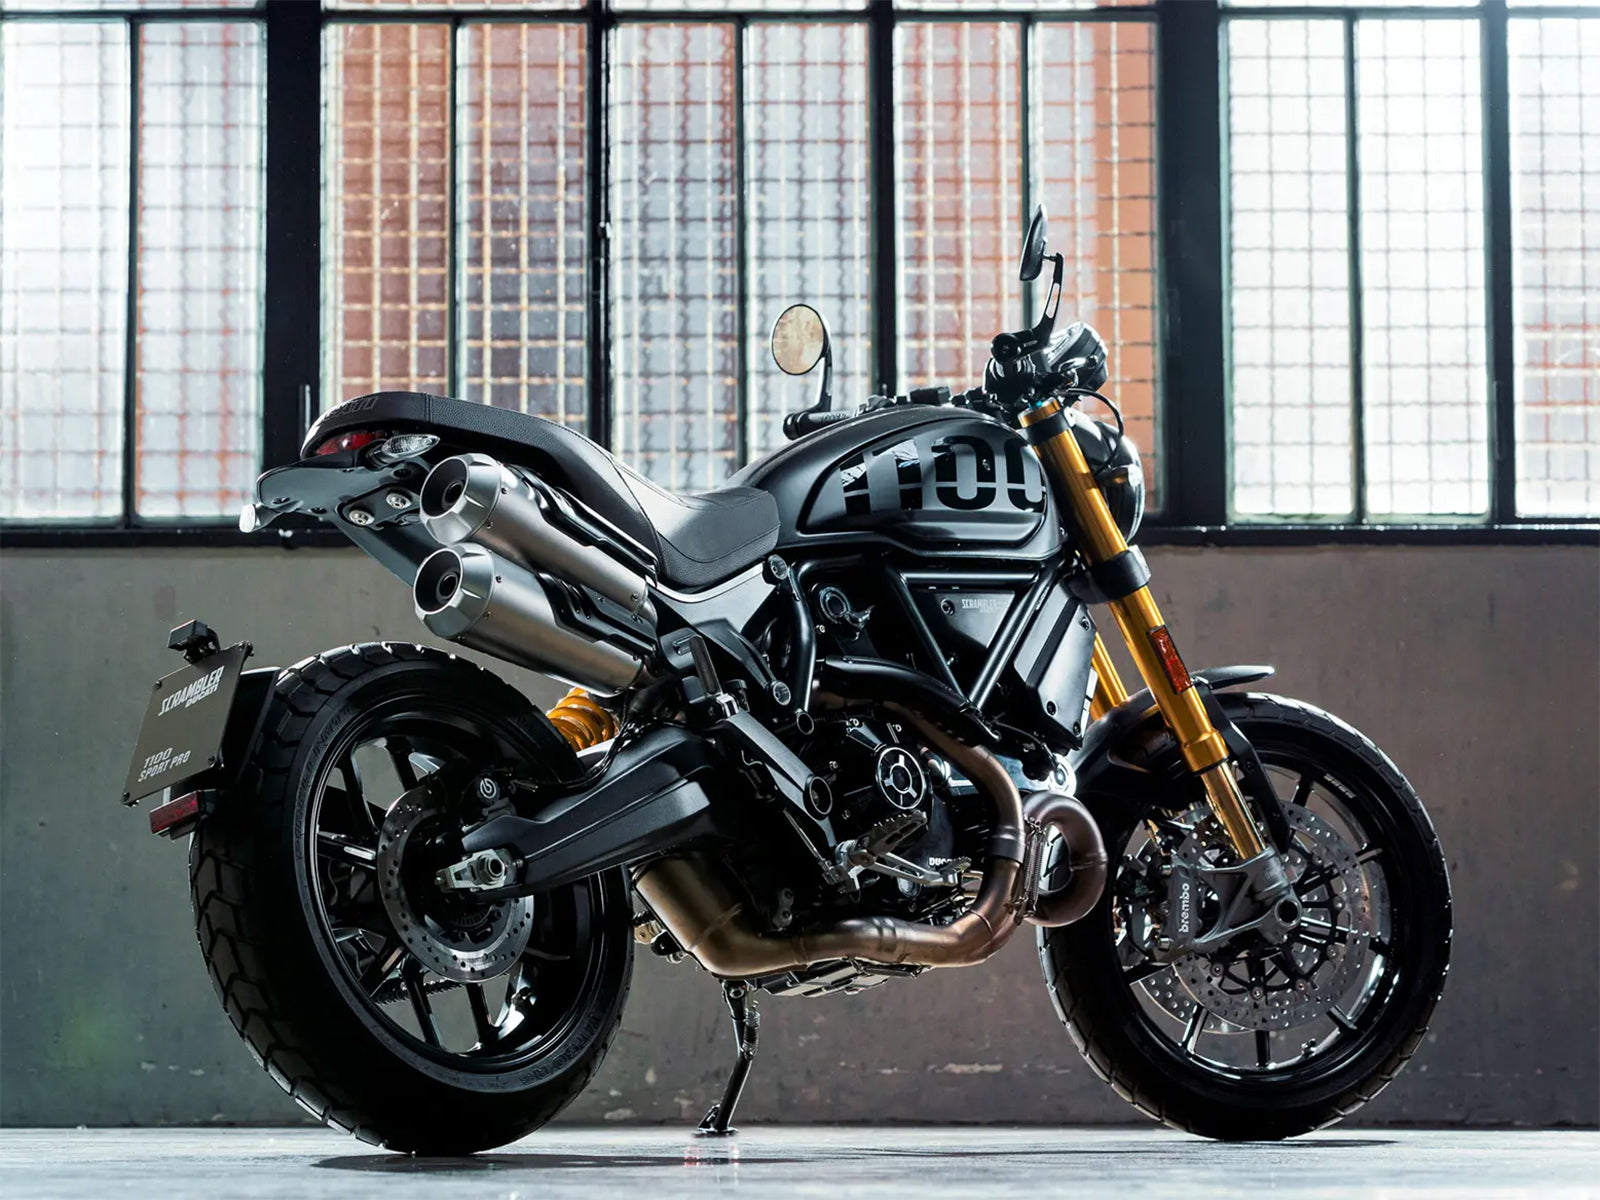 Ducati Motorcycle Reveal the new 2020 Scrambler 1100 Pro and Sport Pro